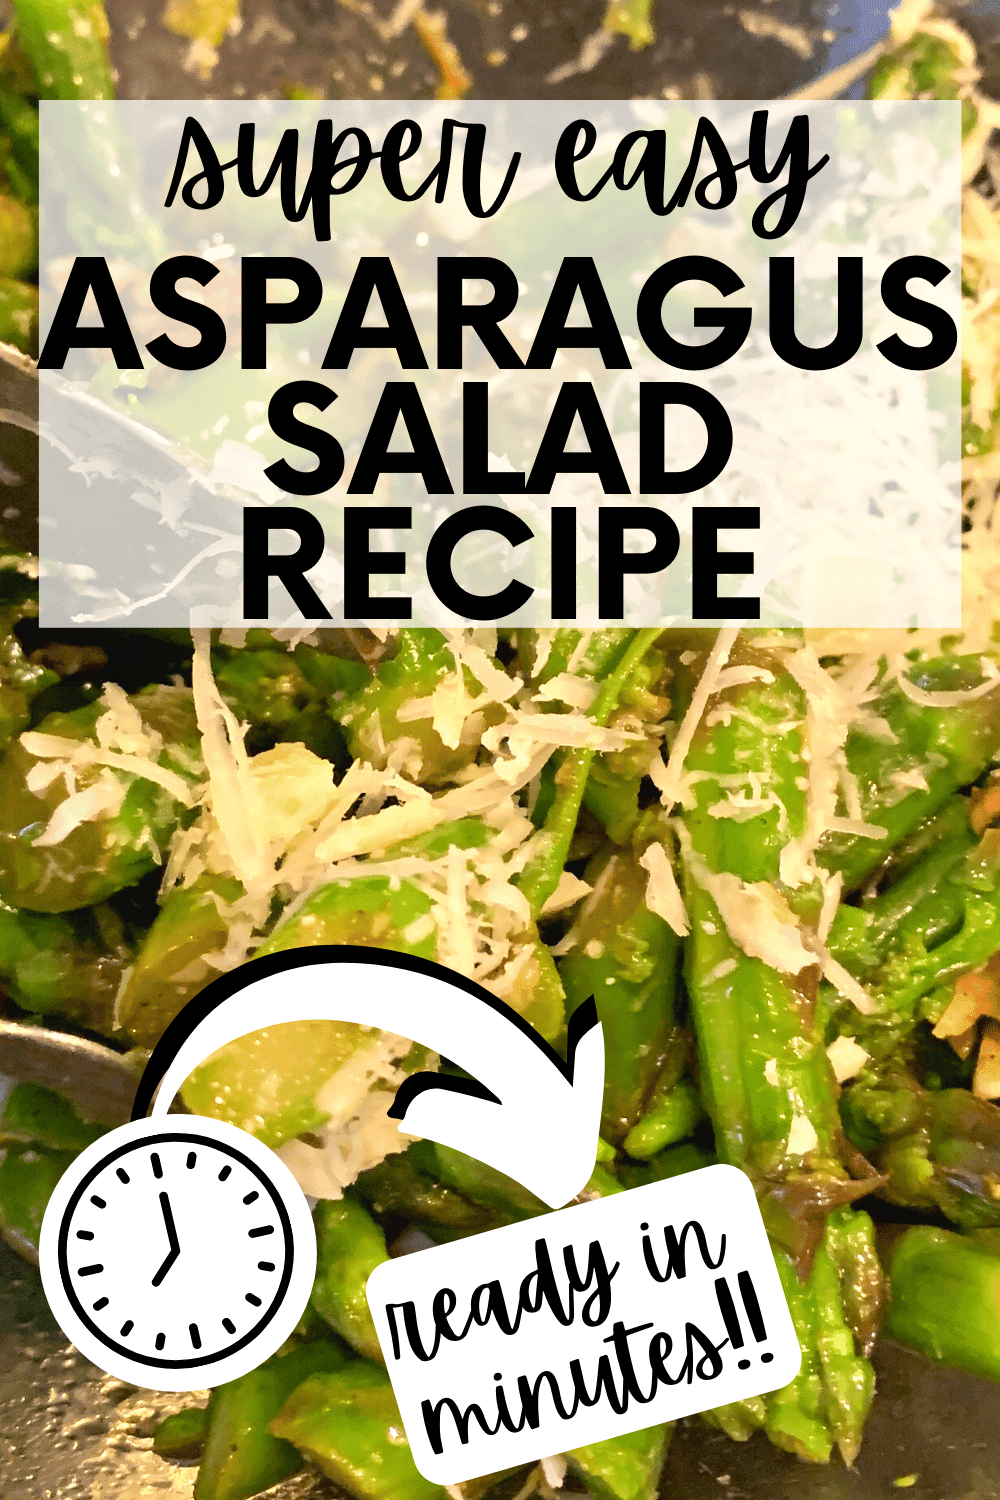 Quick and Easy Cold Asparagus Salad Recipe (roasted asparagus salad recipes)